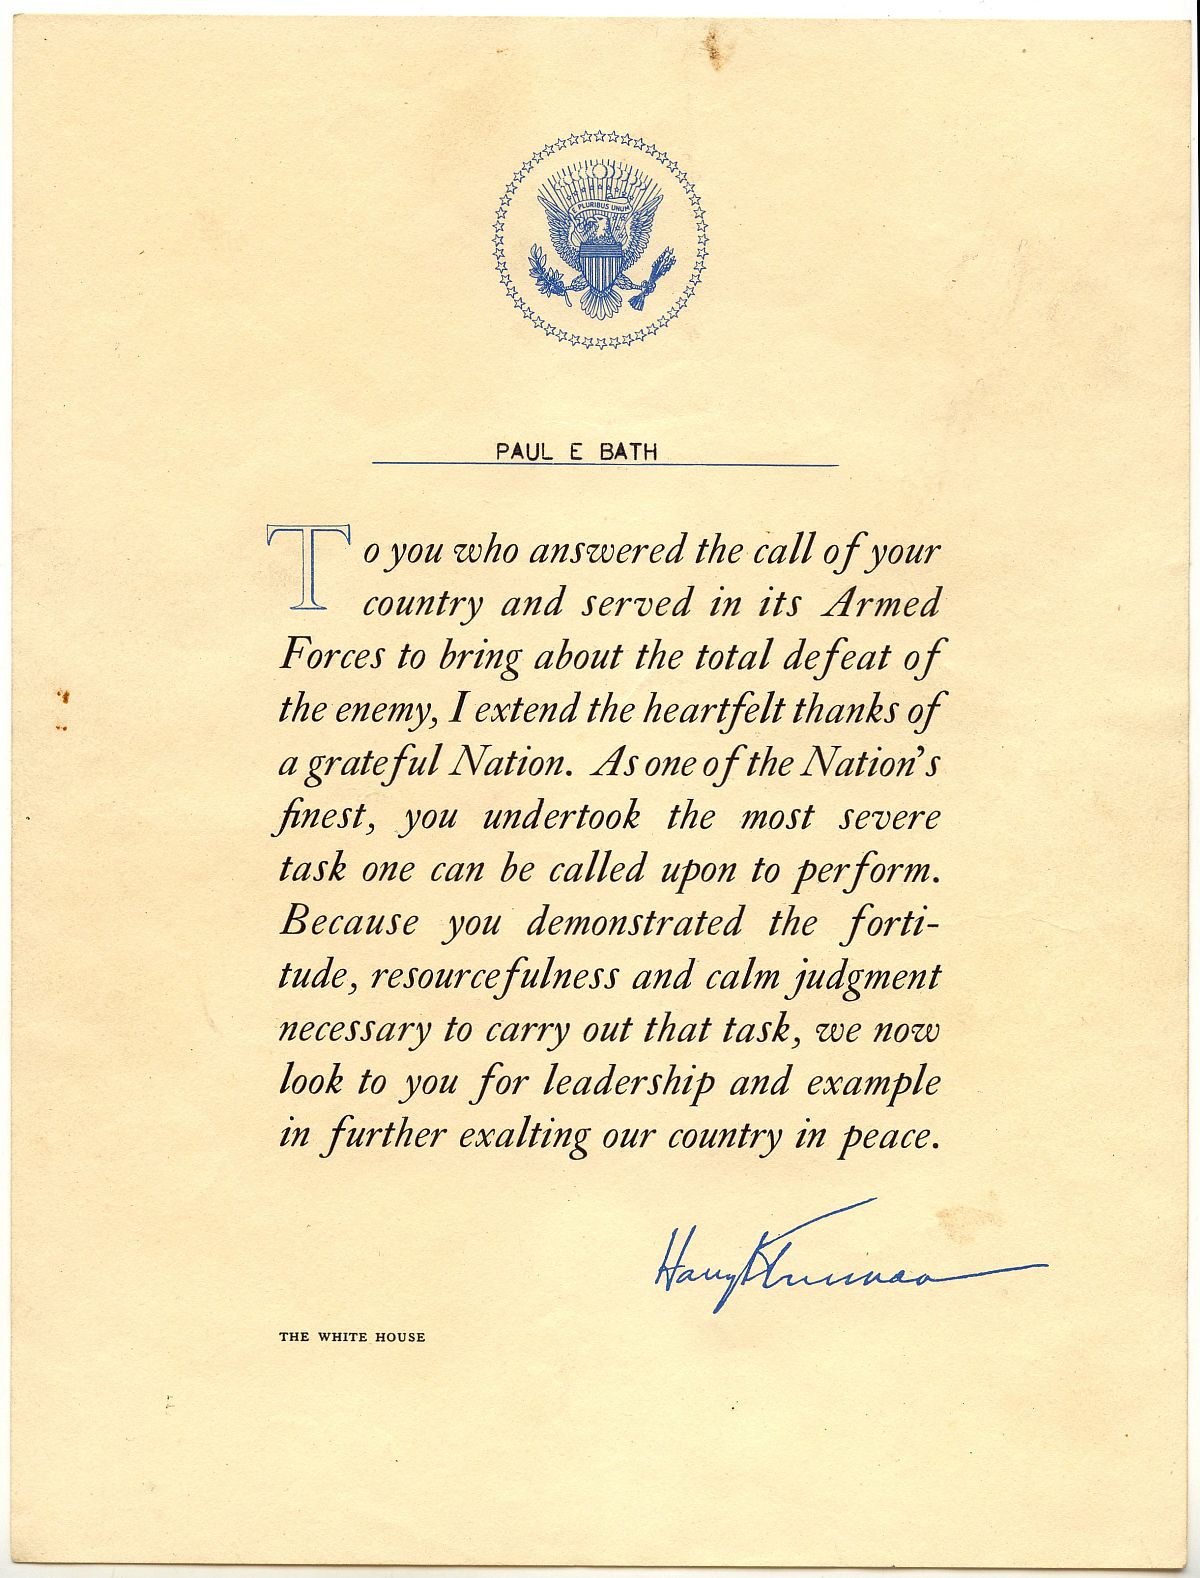 This certificate of appreciate is signed (not a real signature) by President Harry Truman.